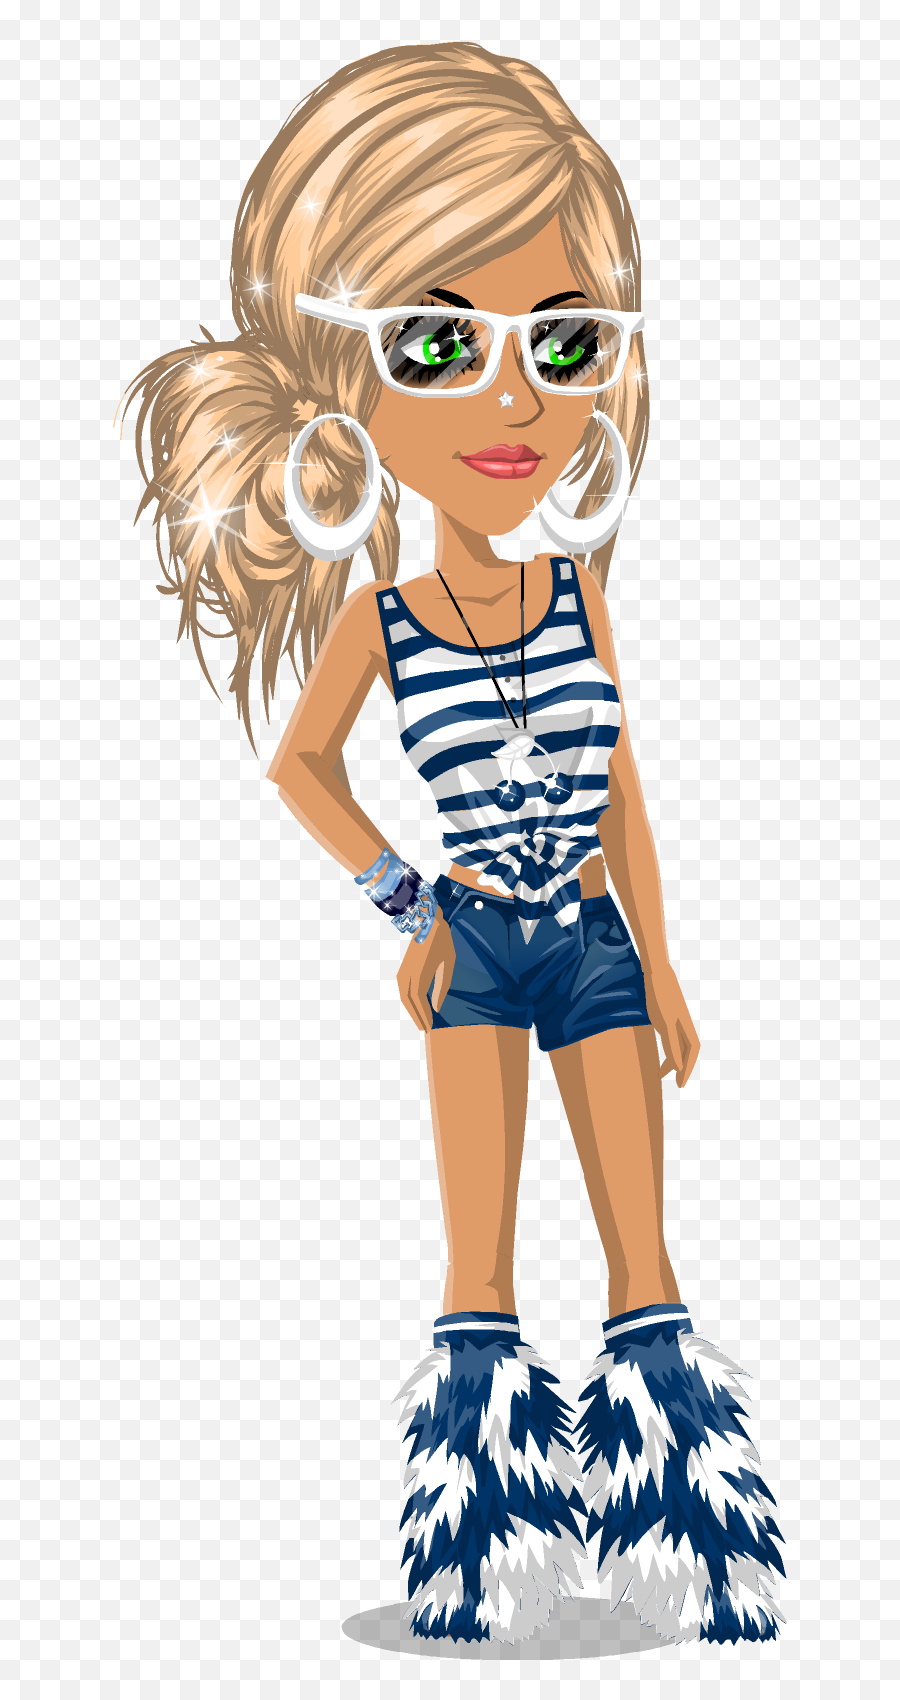 21 Moviestarplanet Ideas - Outfit Movie Star Planet Emoji,How To Use The Emojis That Are For Diamonds On Msp